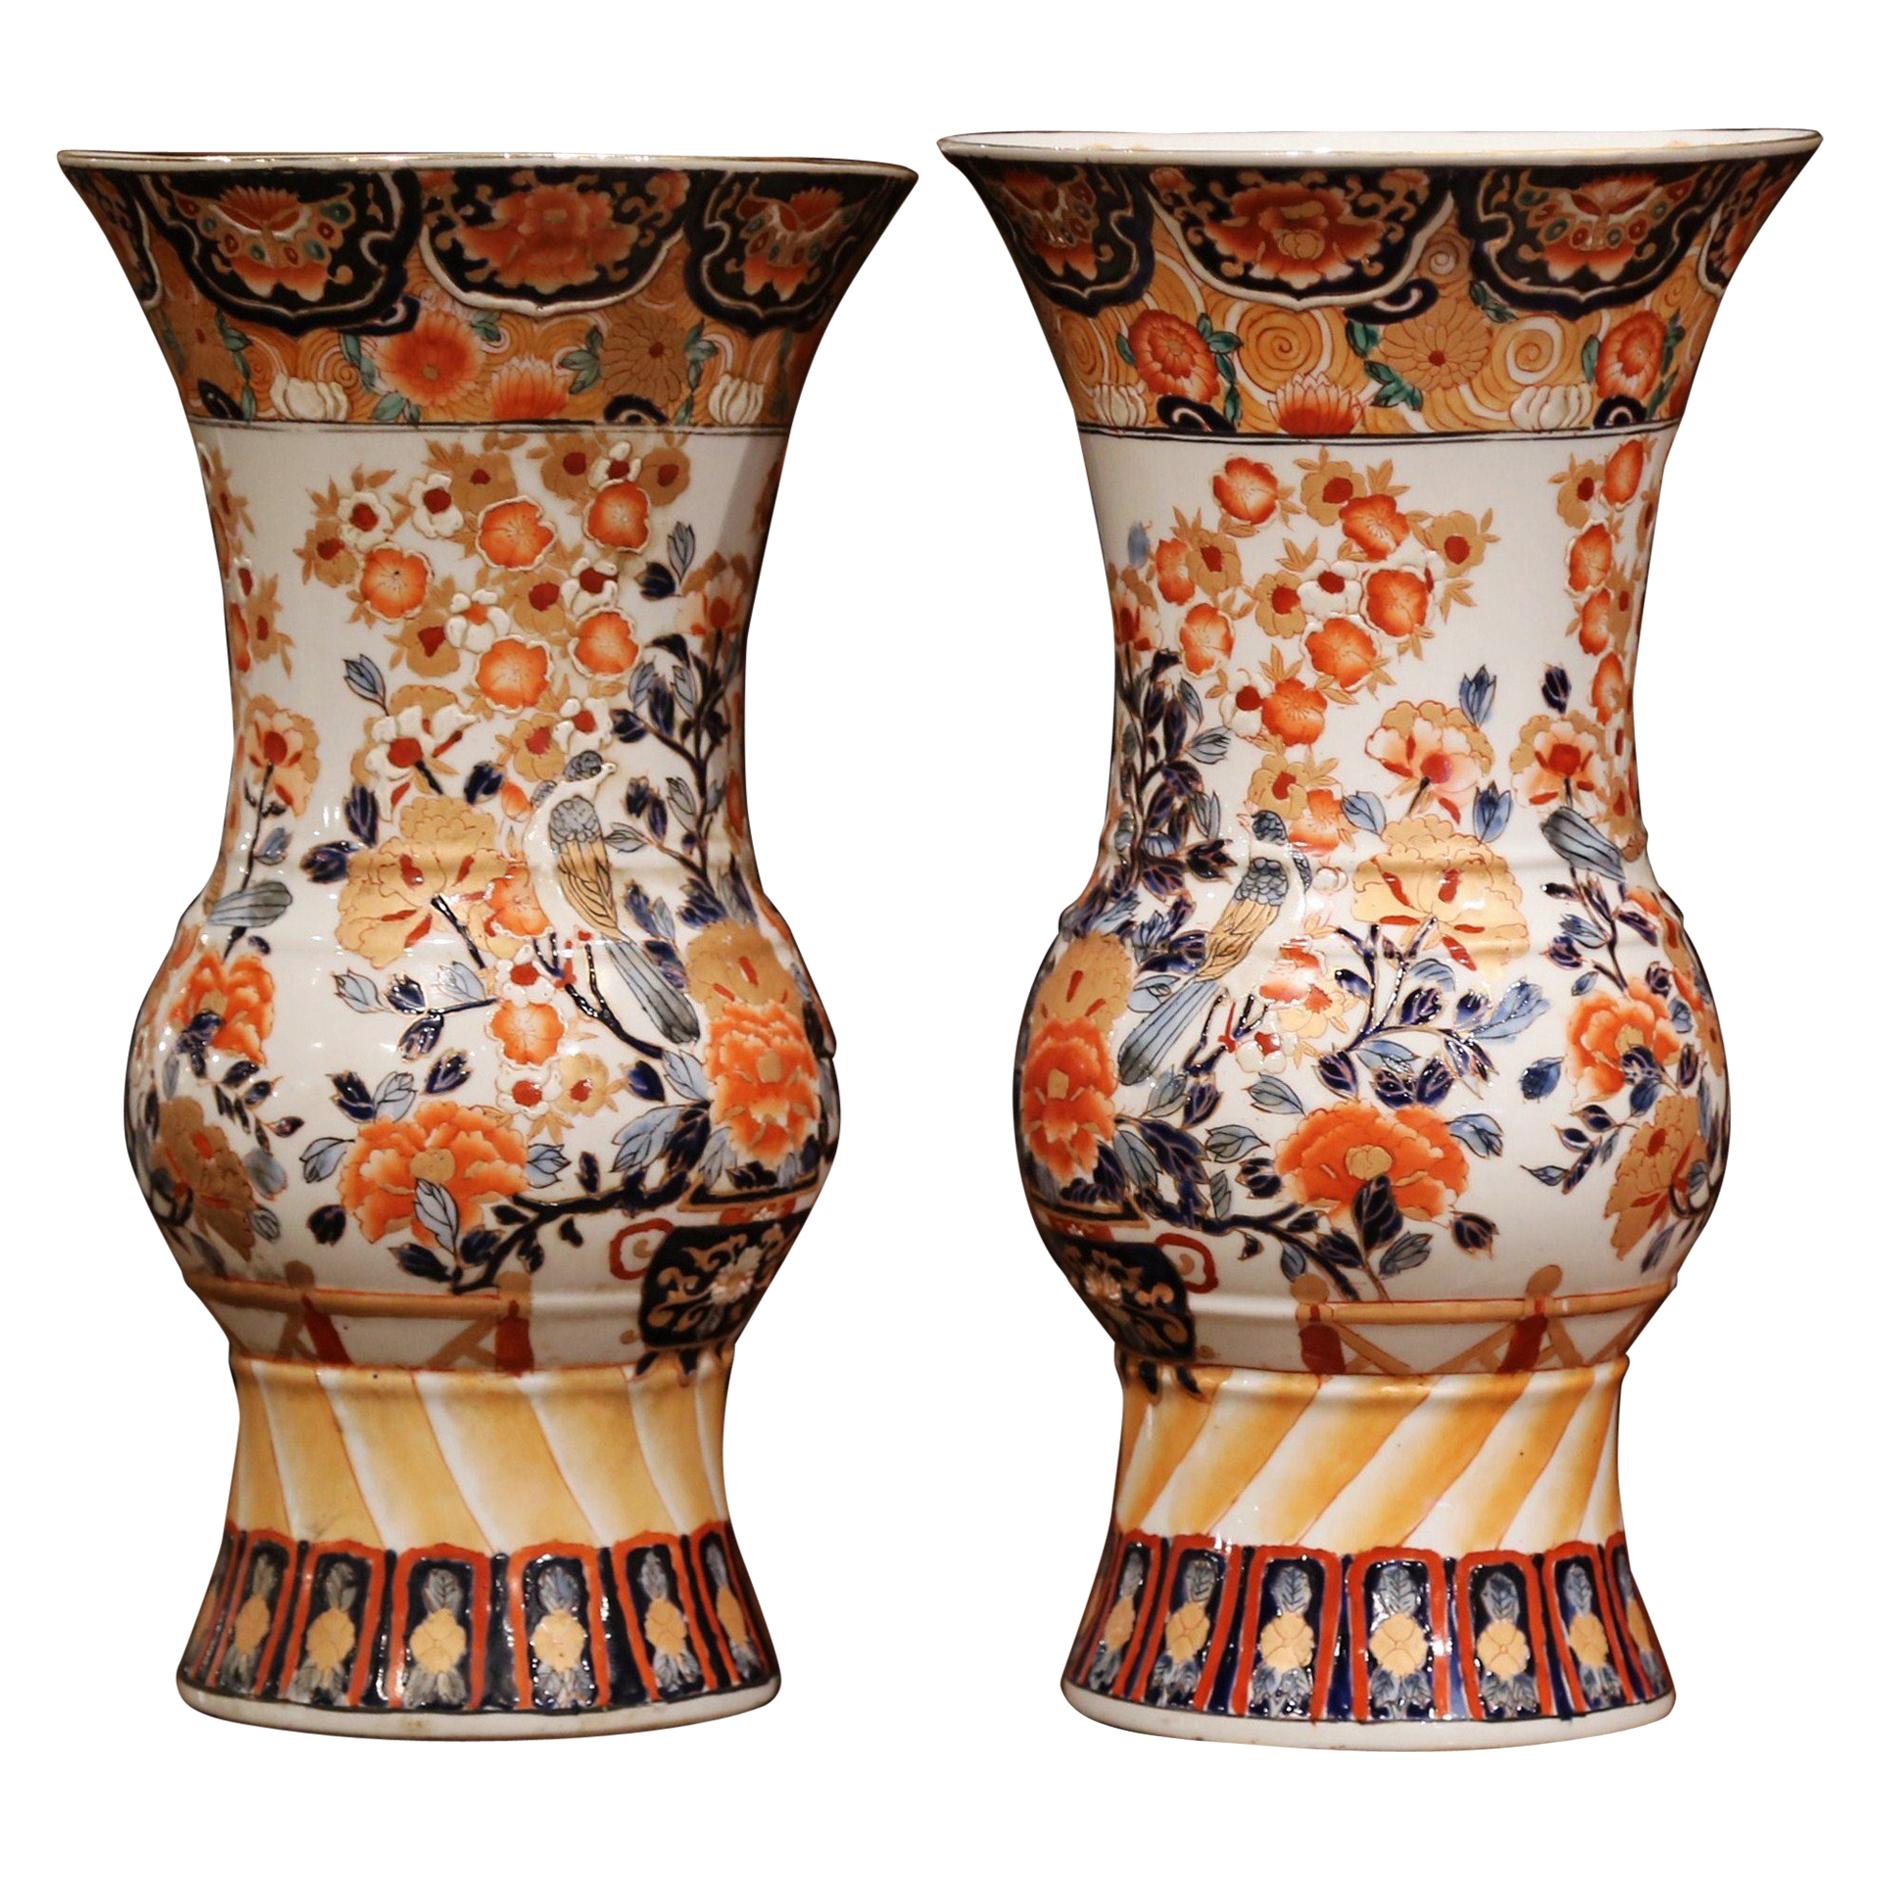 Pair of Early 20th Century Japanese Painted and Gilt Porcelain Imari Vases 